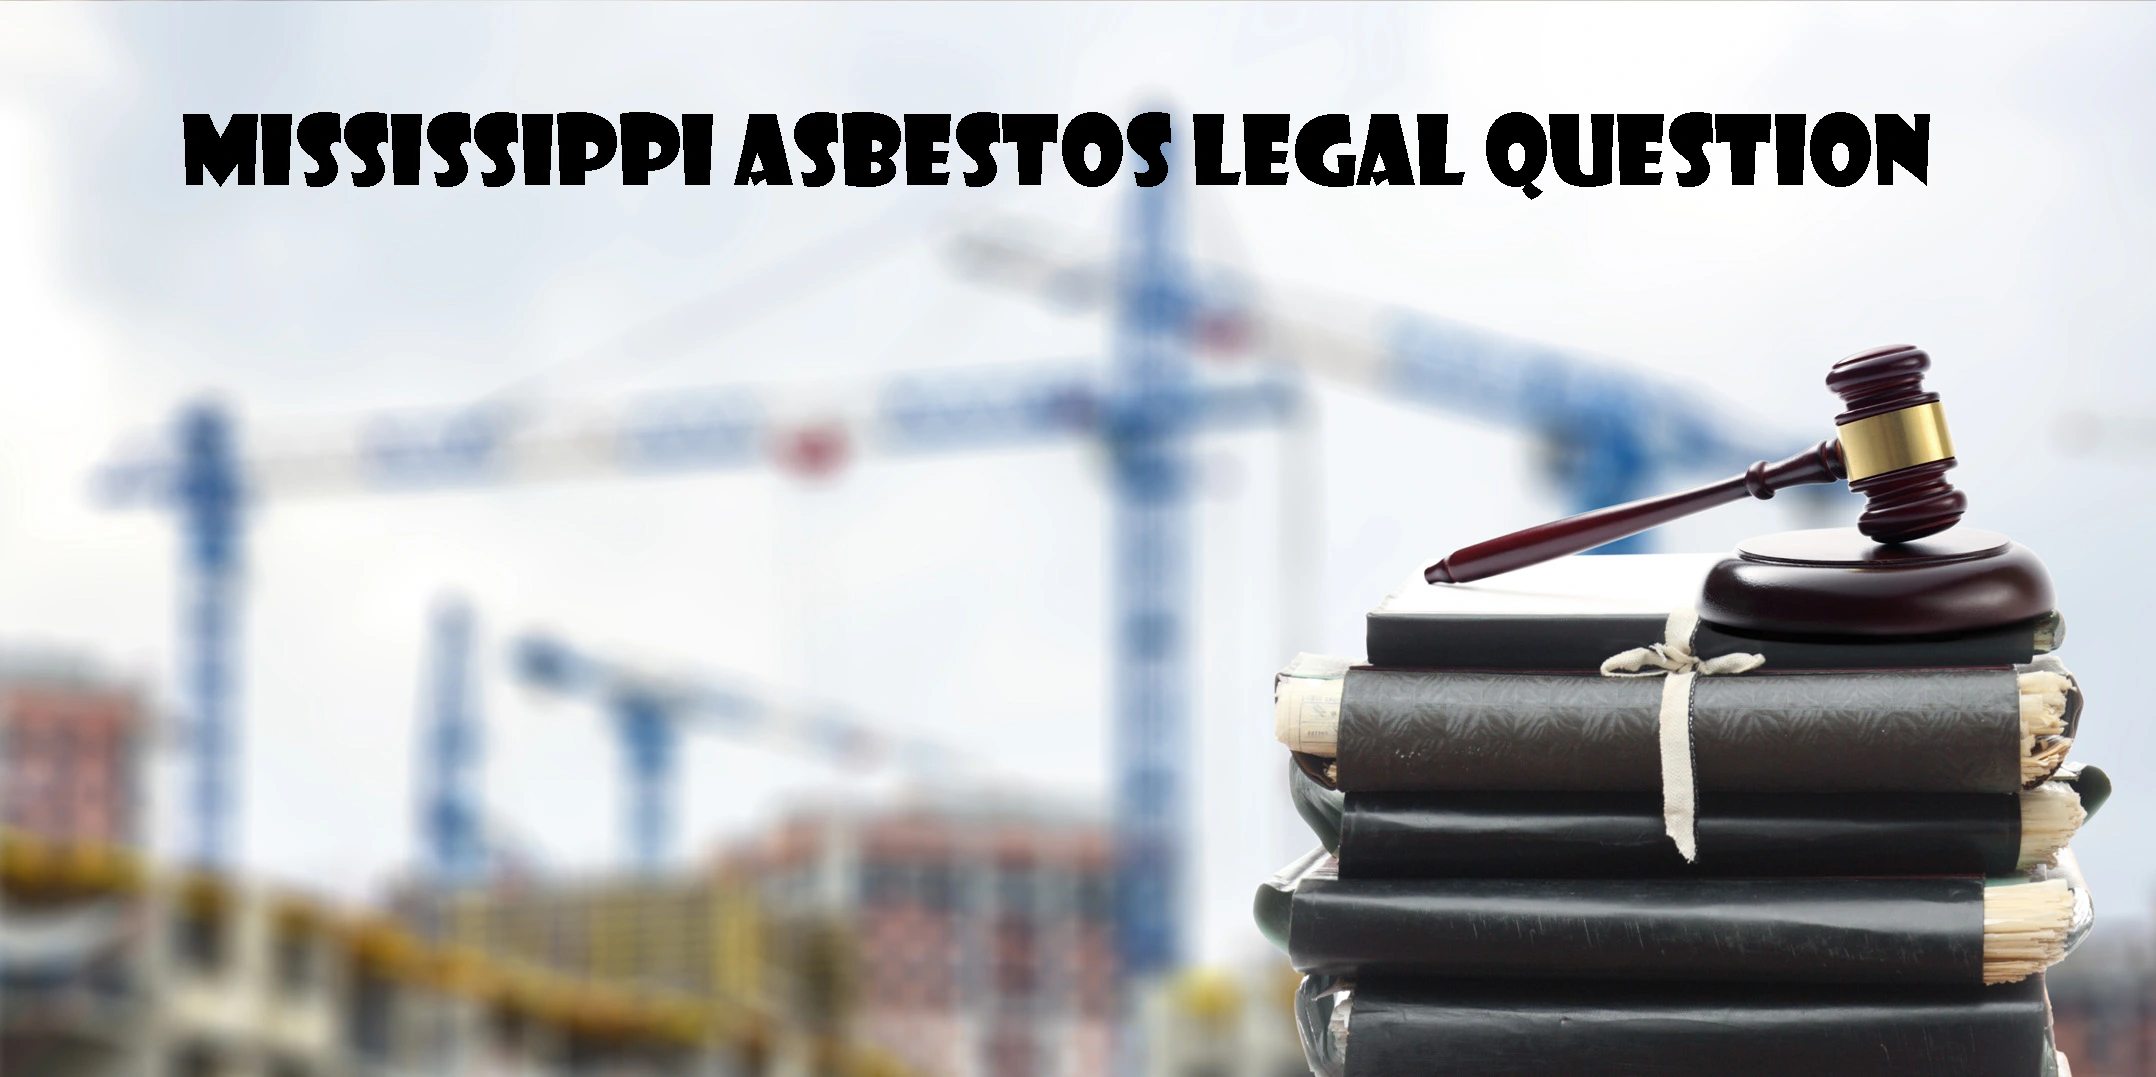 Mississippi Asbestos Legal Question